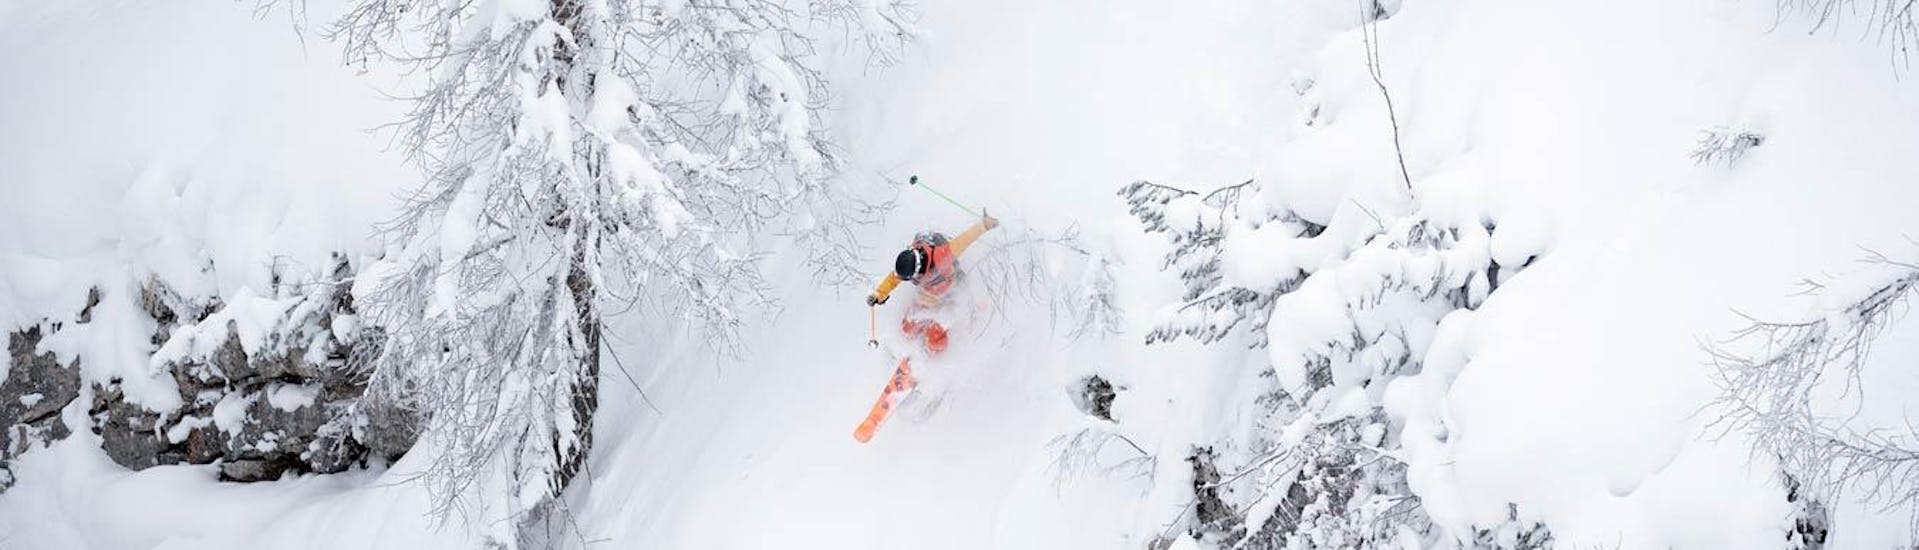 A ski instructor from Skischule Obertraun enjoys his time in the deep snow during the private off-piste skiing lesson for all levels in the Dachstein Krippenstein region.